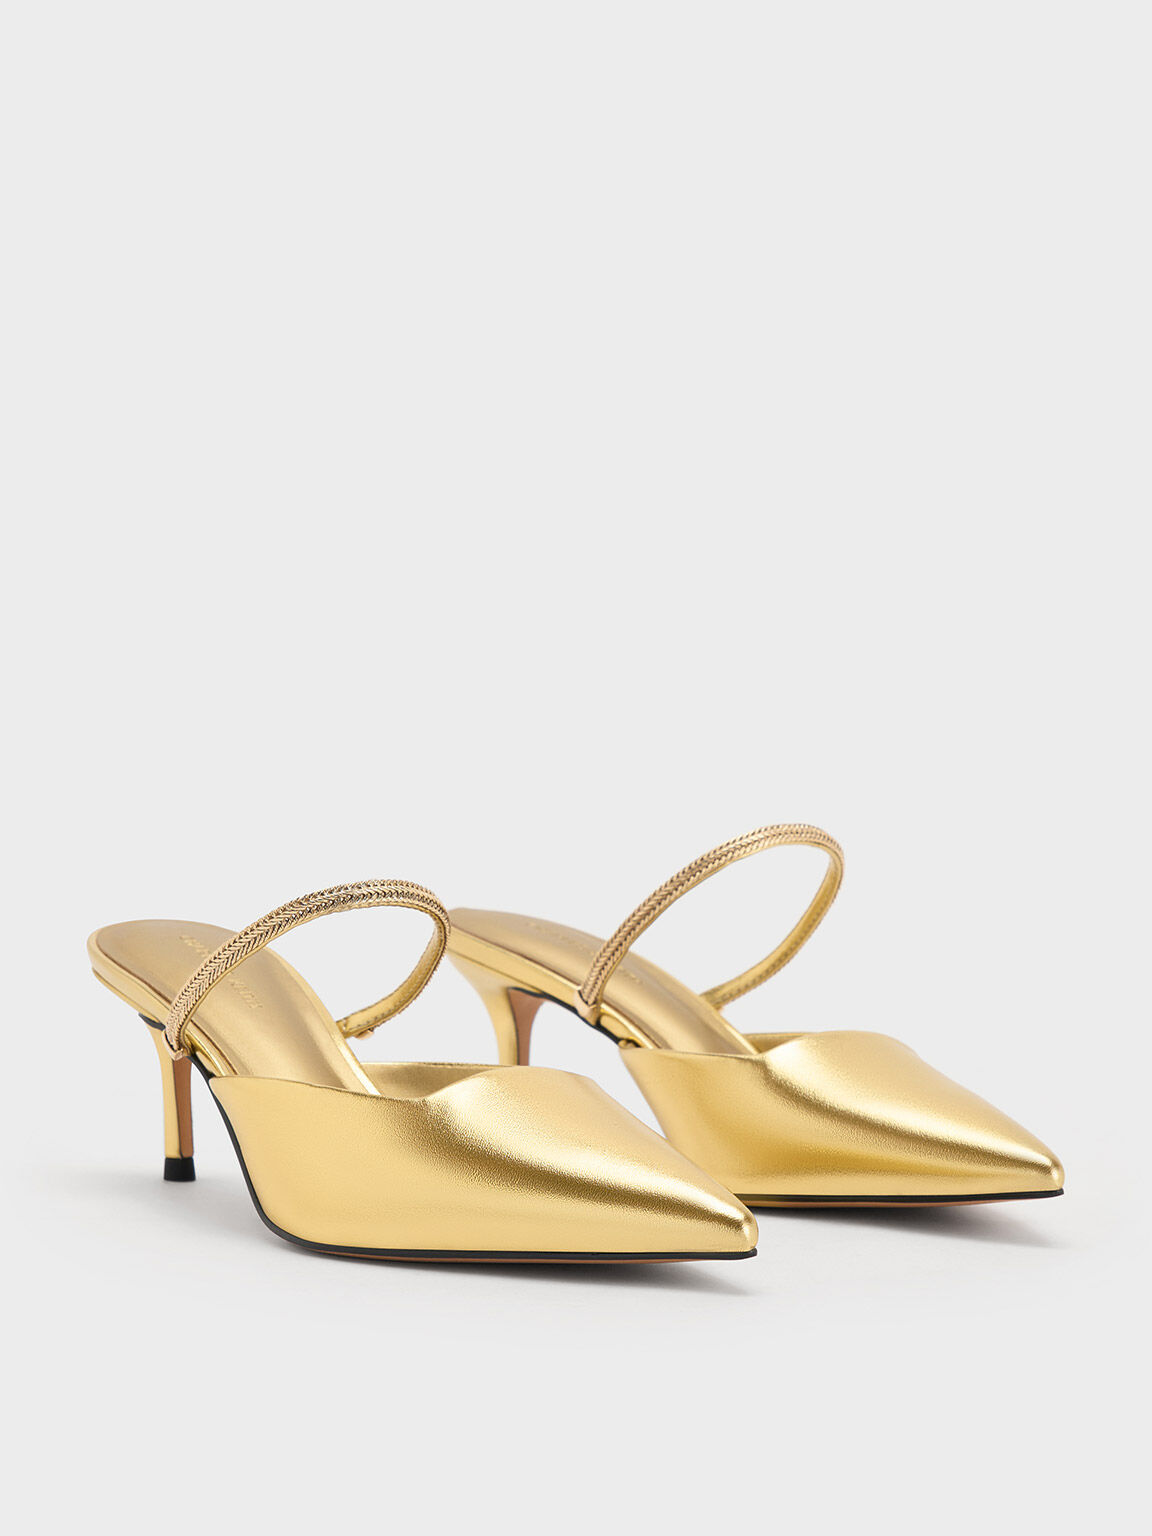 Metallic Braided Strappy Heeled Mules, Gold, hi-res